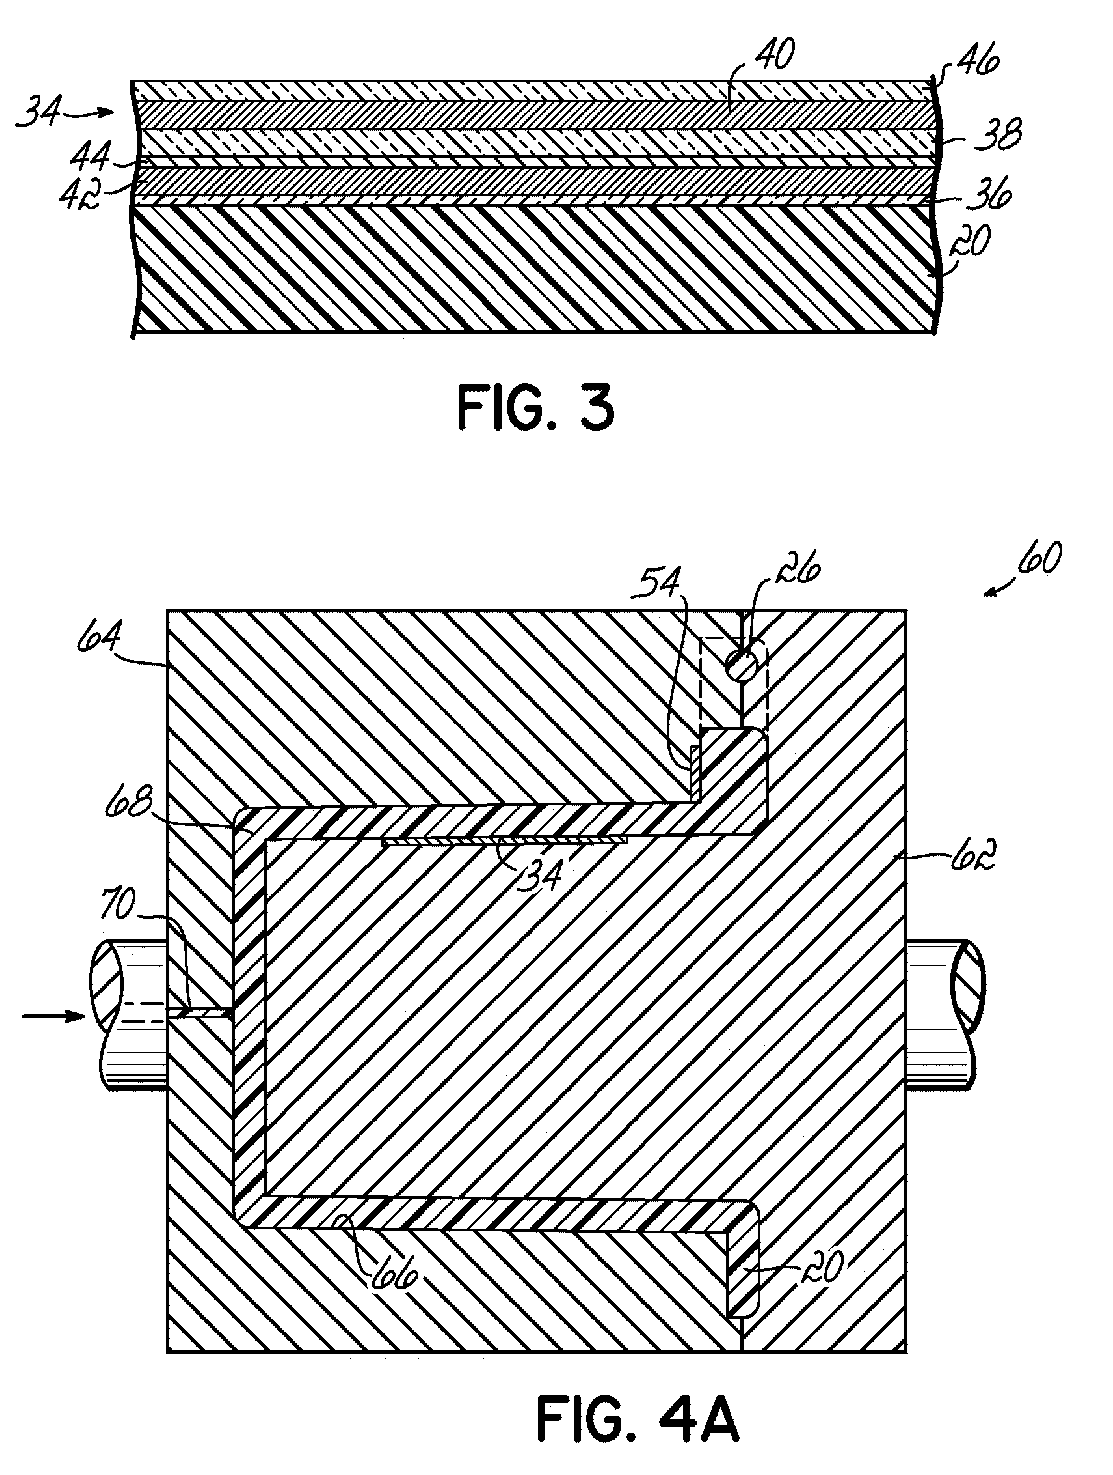 Automotive storage compartment having an electroluminescent lamp and method of making the same